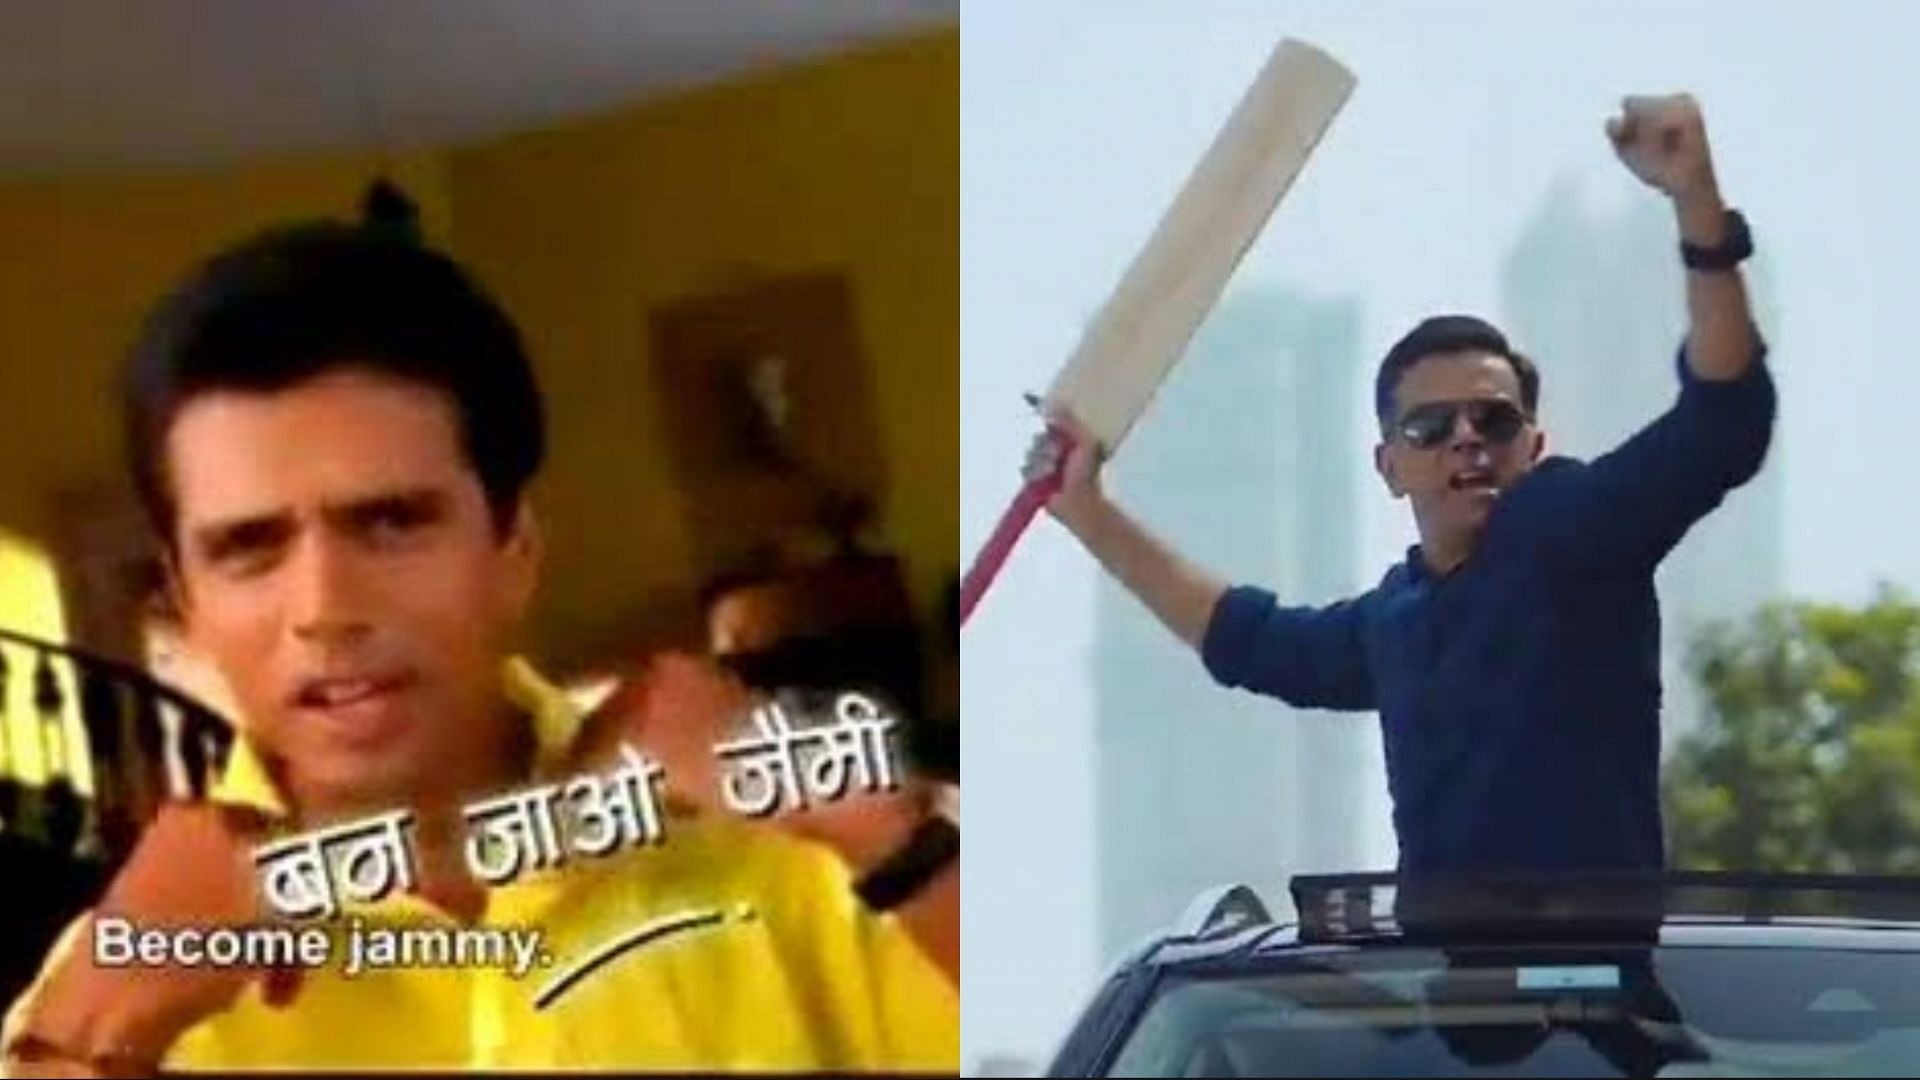 Rahul Dravid has worked in some entertaining commercials